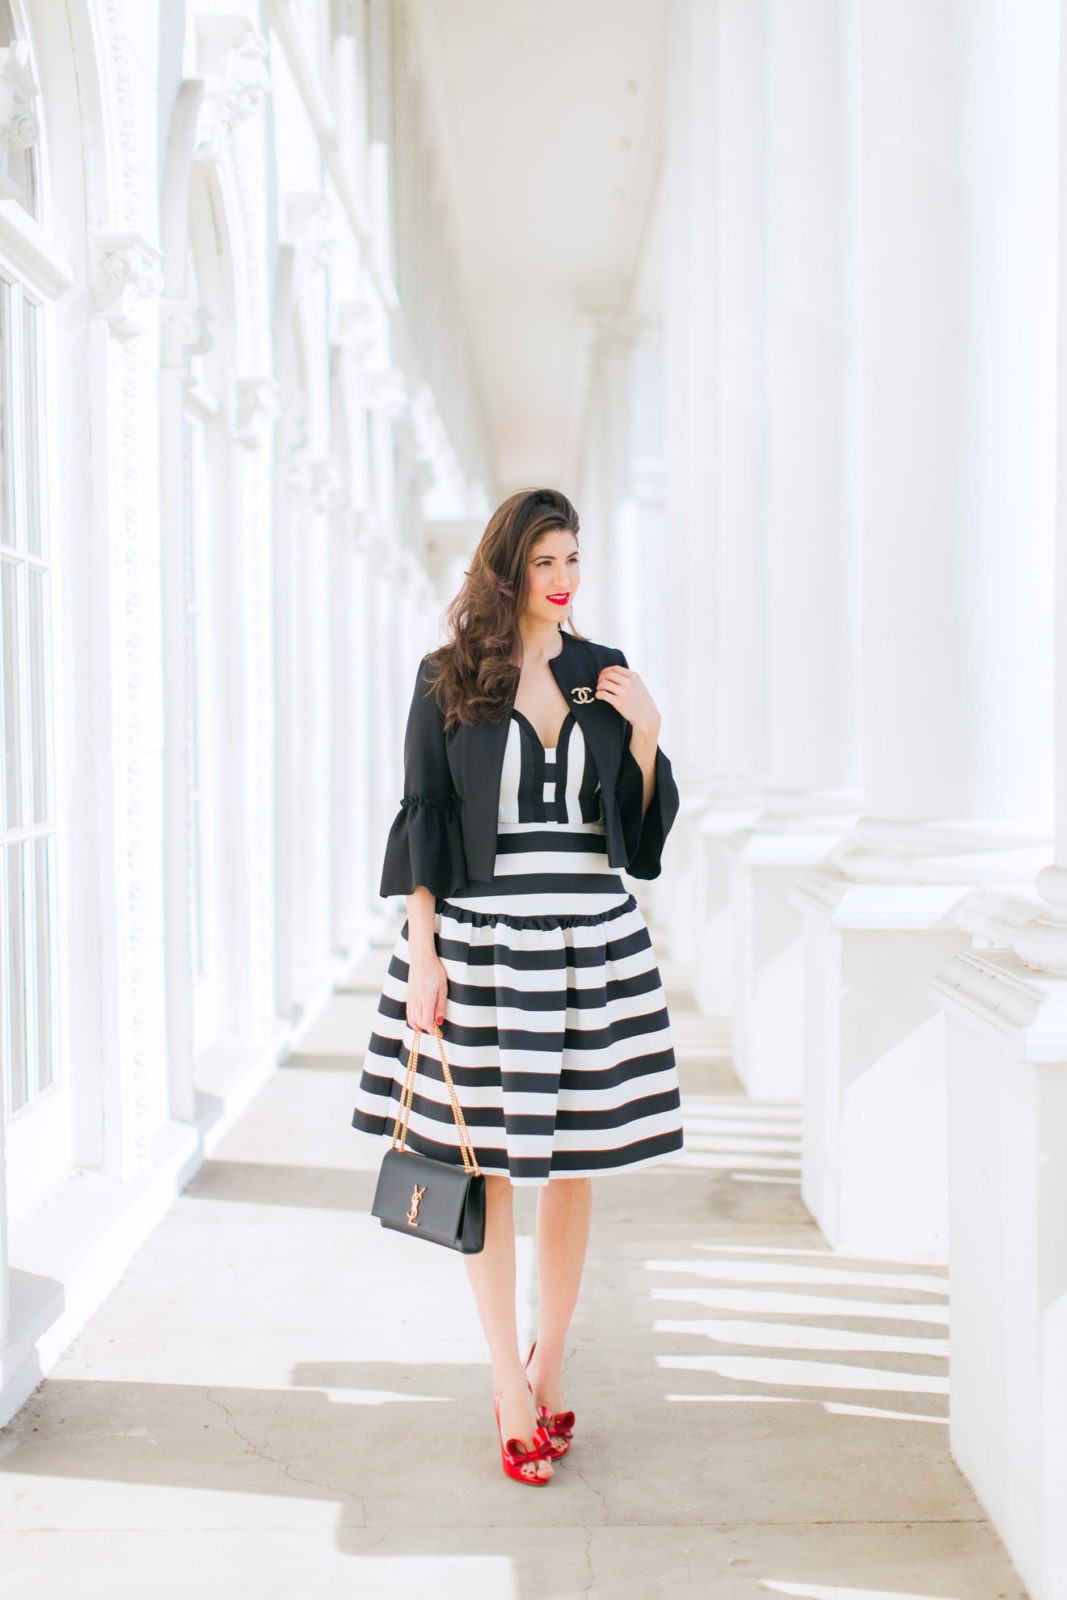 Laura Lily Fashion Travel and Lifestyle Blog, 12 Days of Holiday Style, A Striped Dress and Giving Tuesday, Asos Striped Dress, Valentino Bow Pumps, 